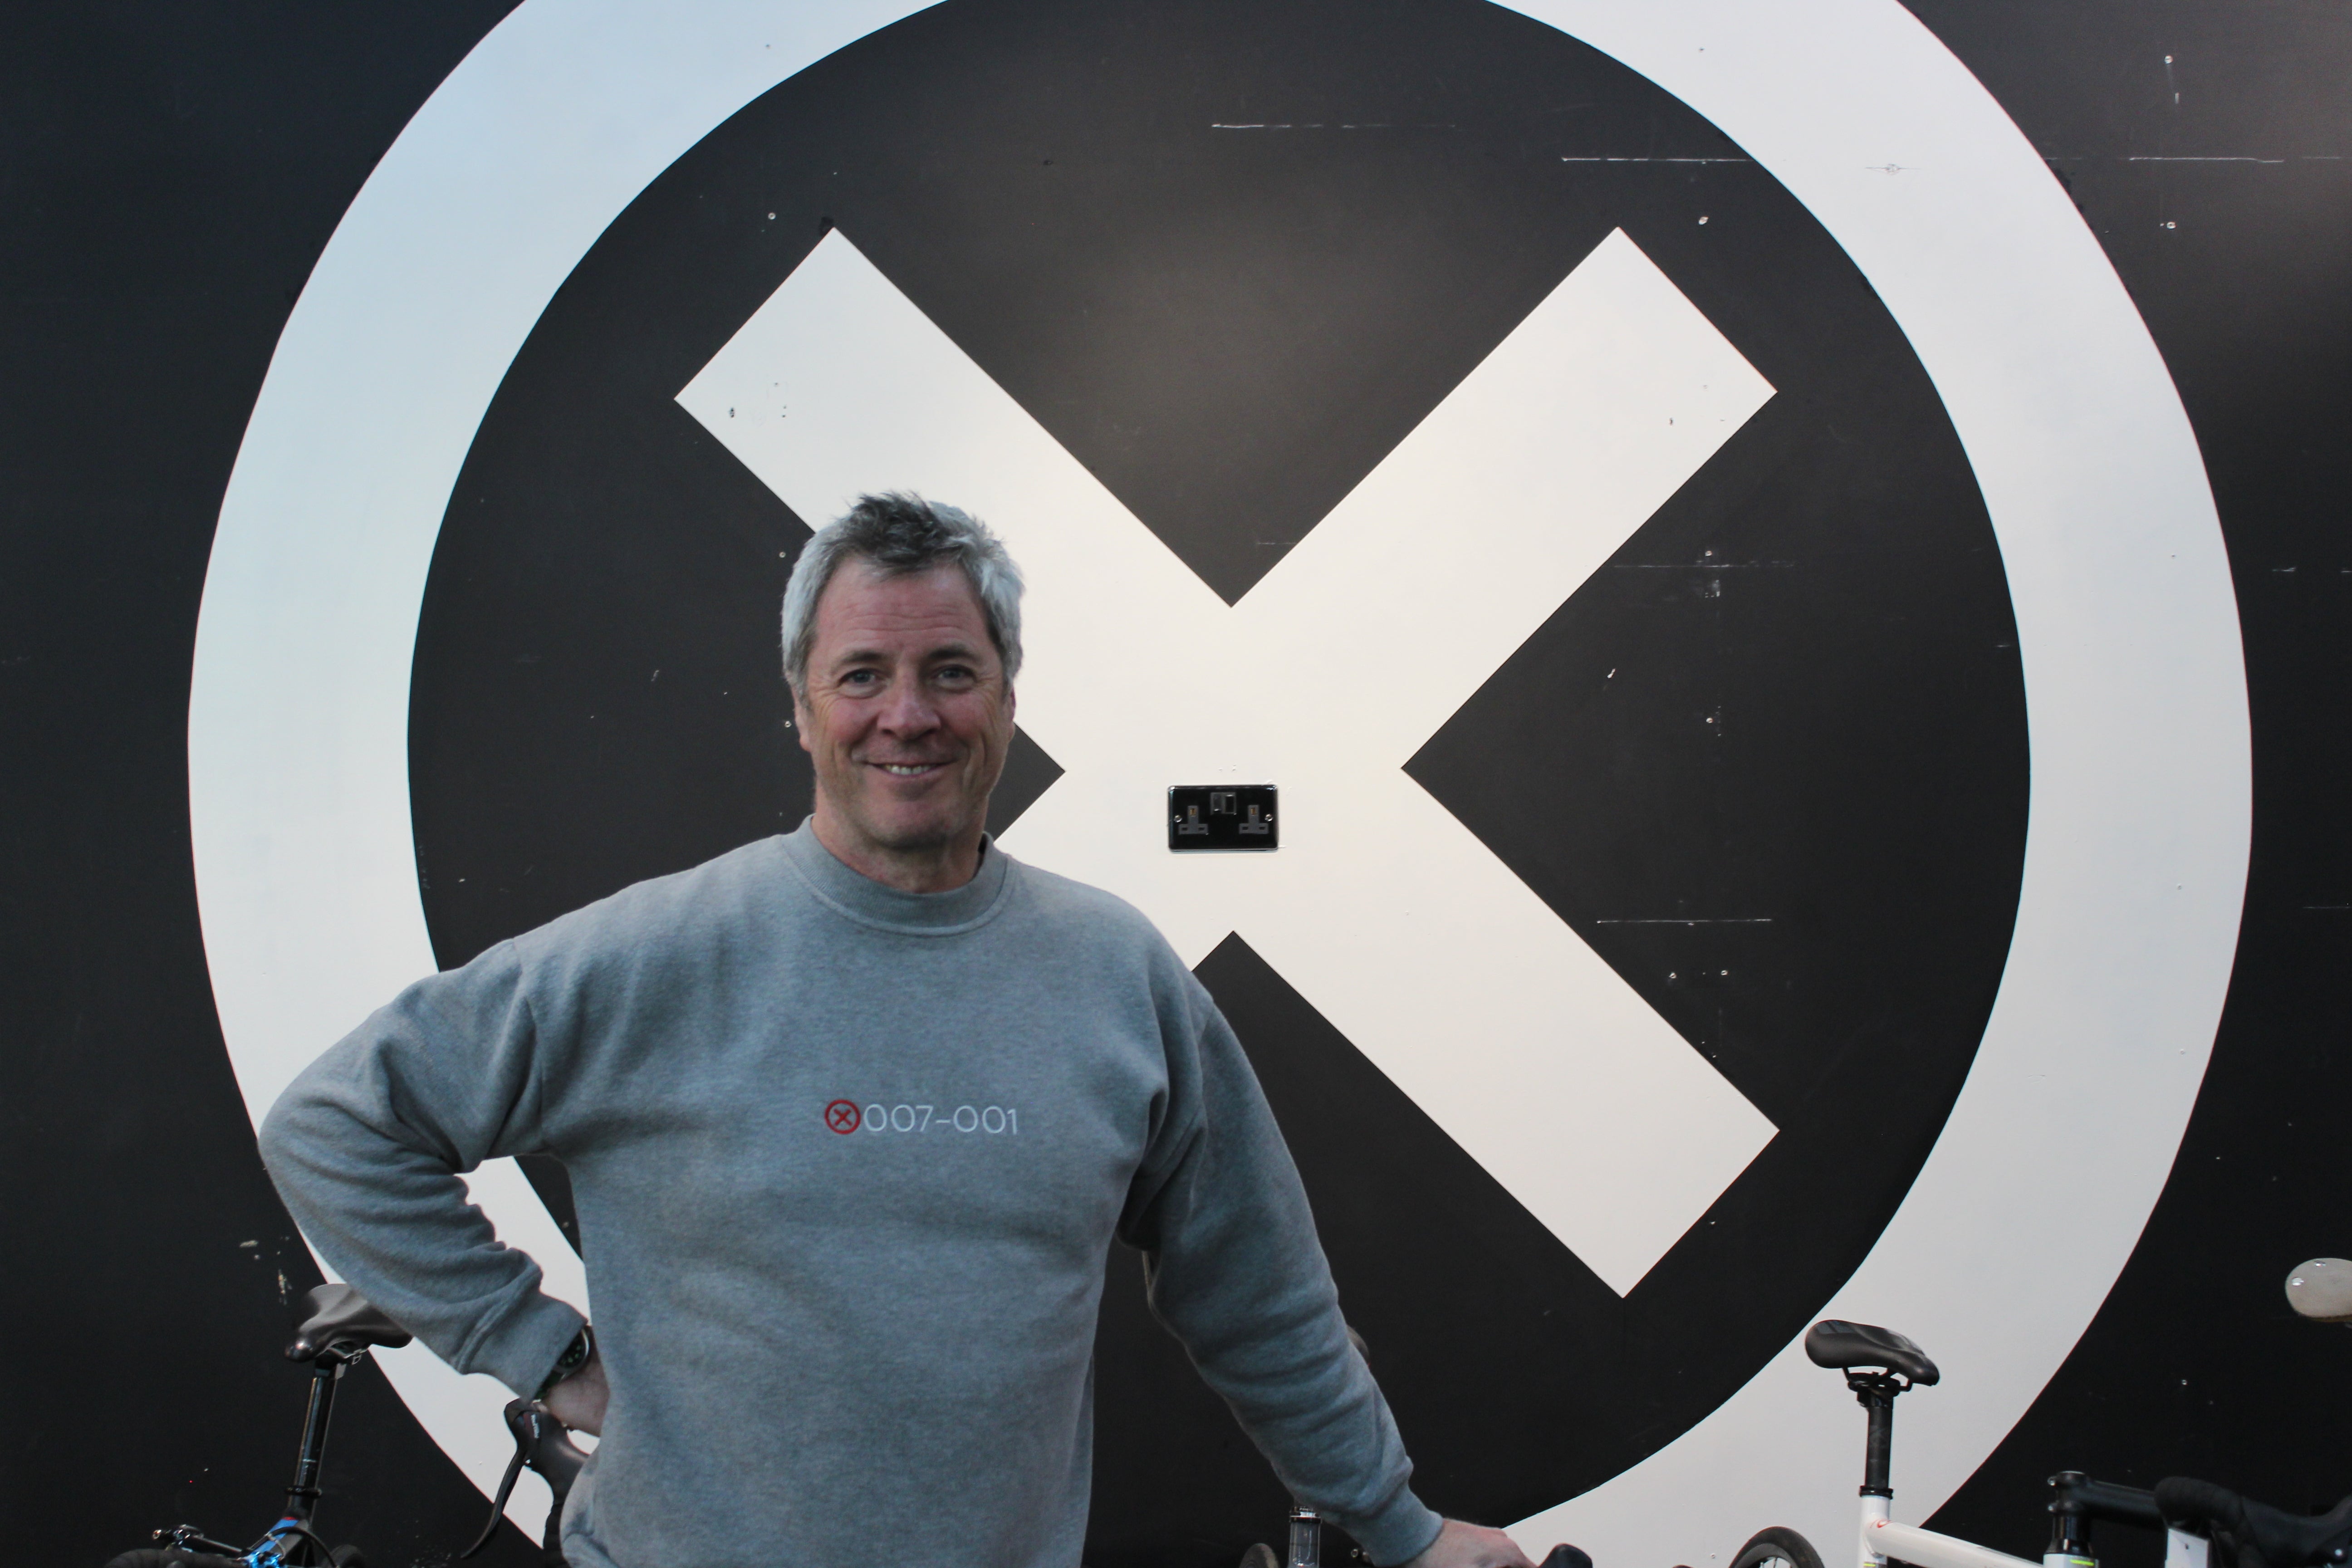 Stef Jones founded XO Bikes, and its parent charity Onwards & Upwards, after visiting HMP Brixton, where he says the ‘penny dropped’